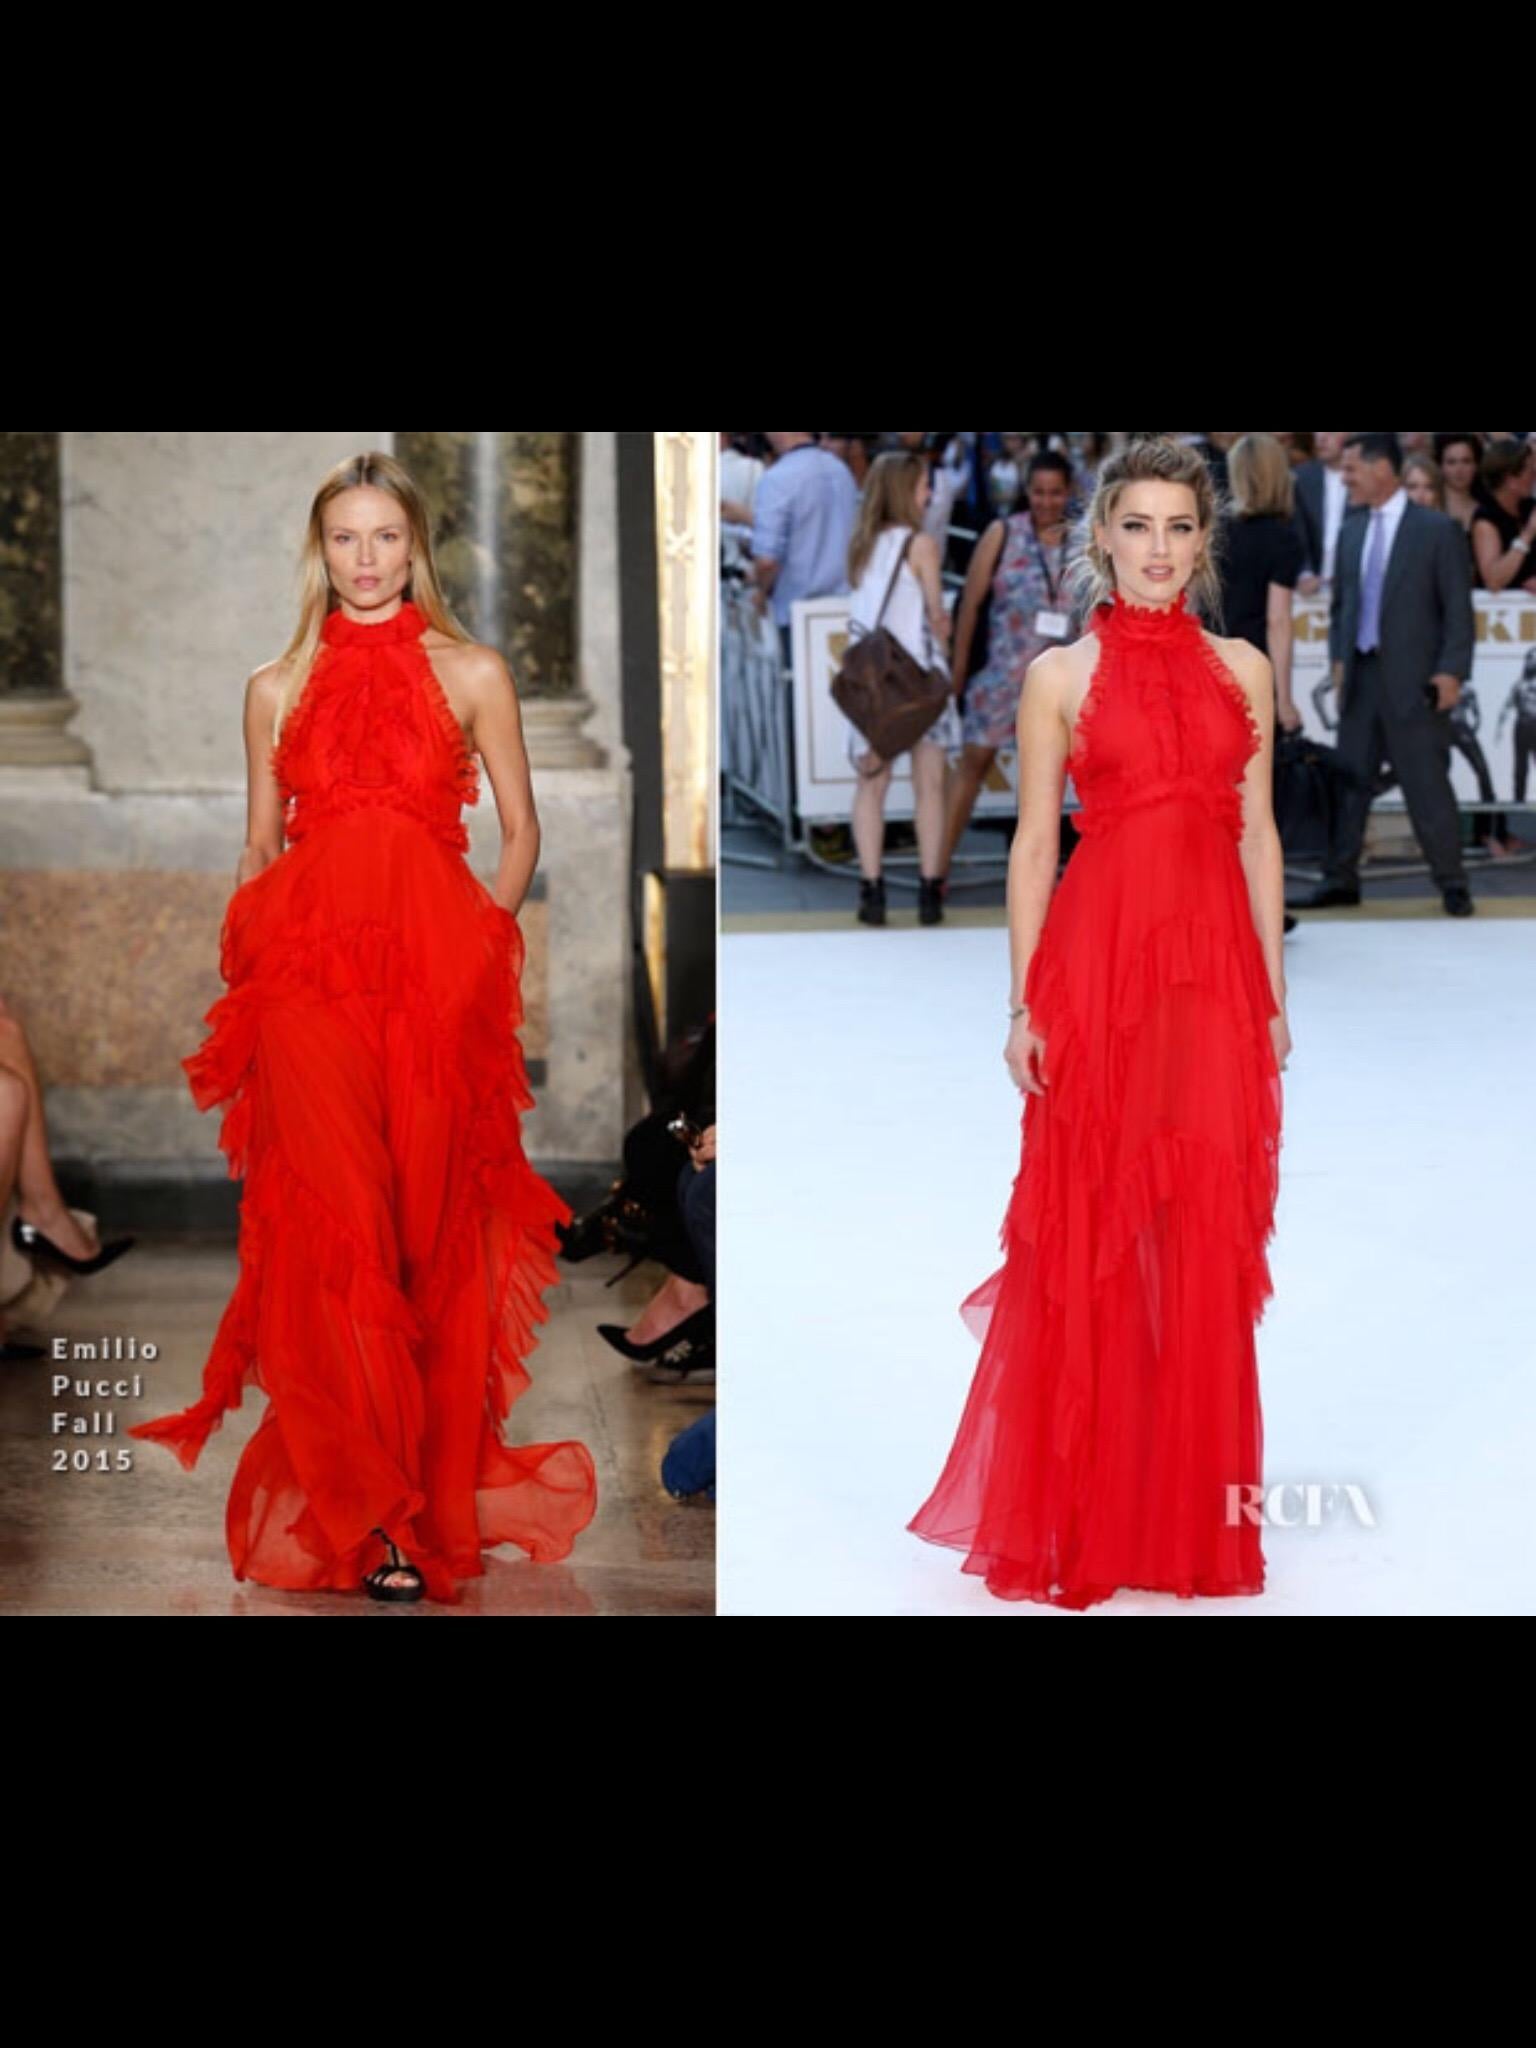 Red Peter Dundas for Emilio Pucci Silk Chiffon Halter Gown Fall 2015